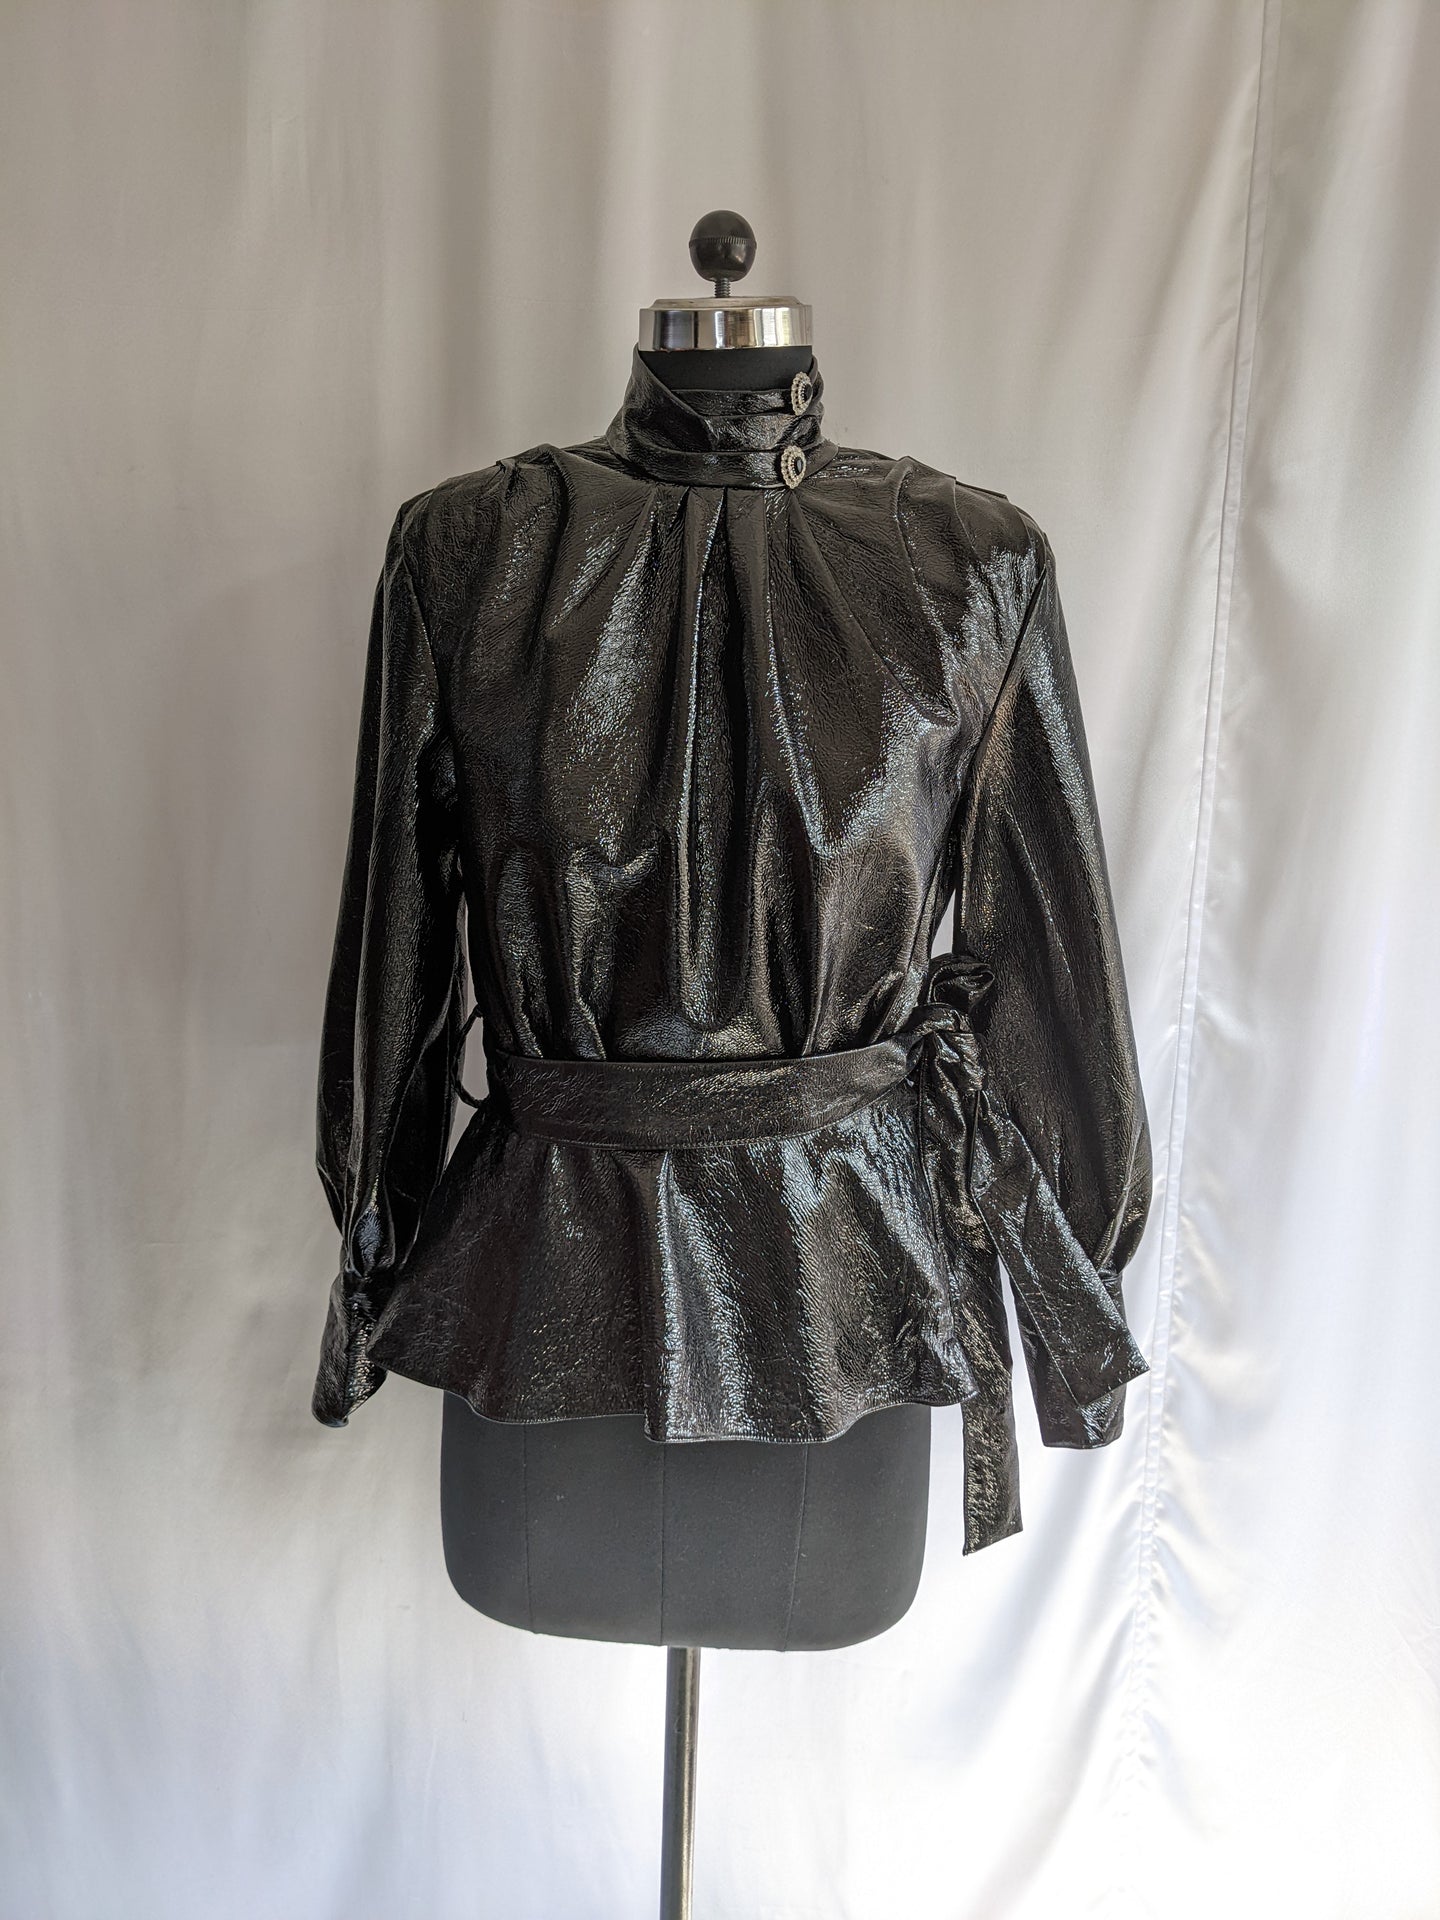 River Island Black Leather Top